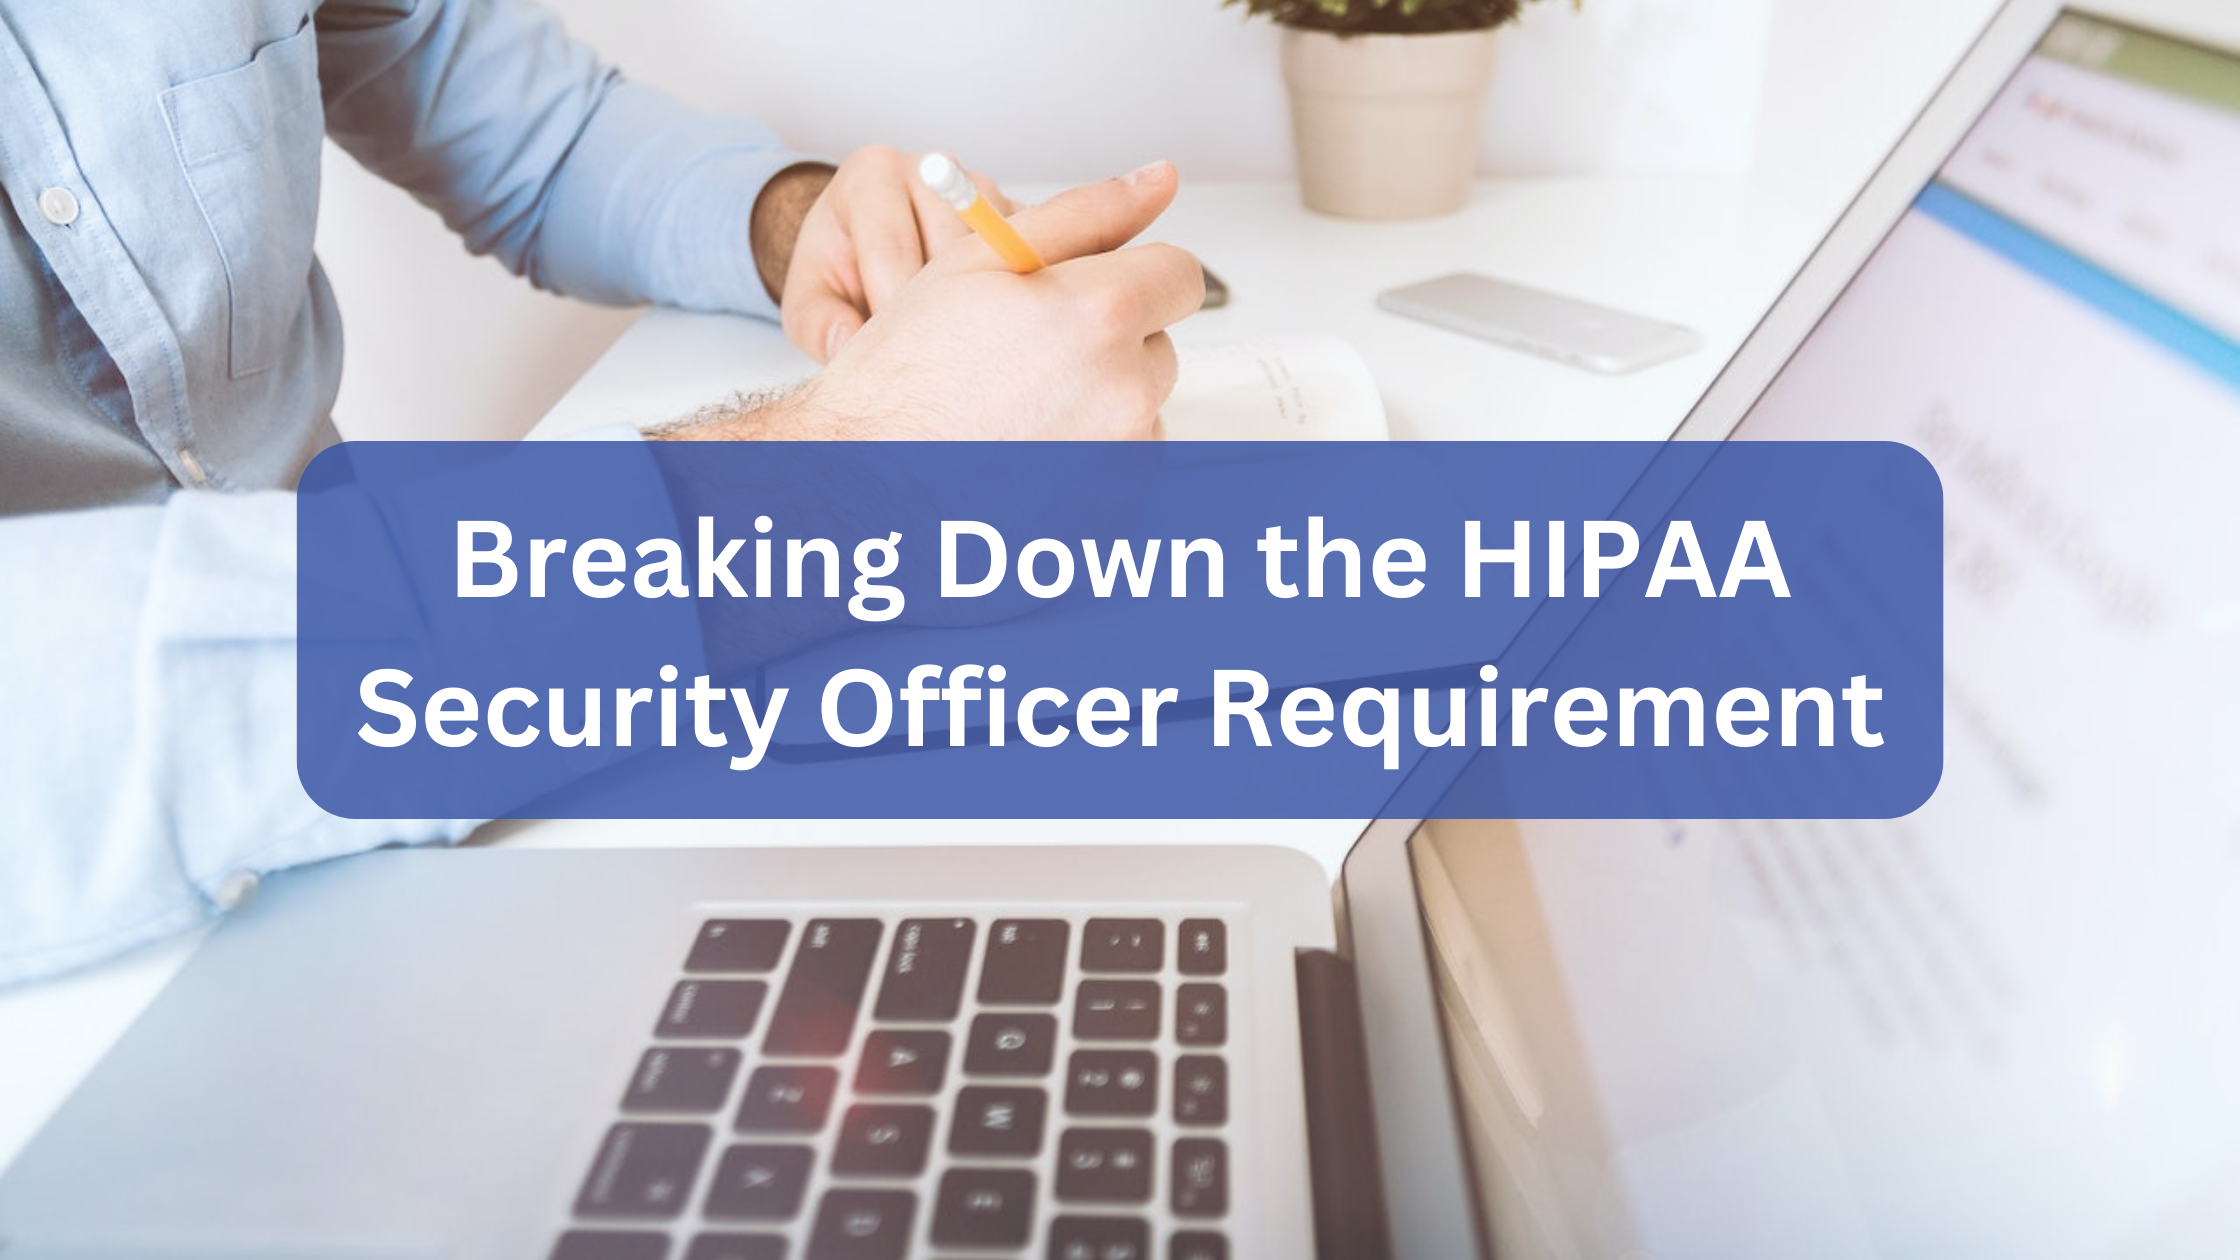 Breaking Down the HIPAA Security Officer Requirement